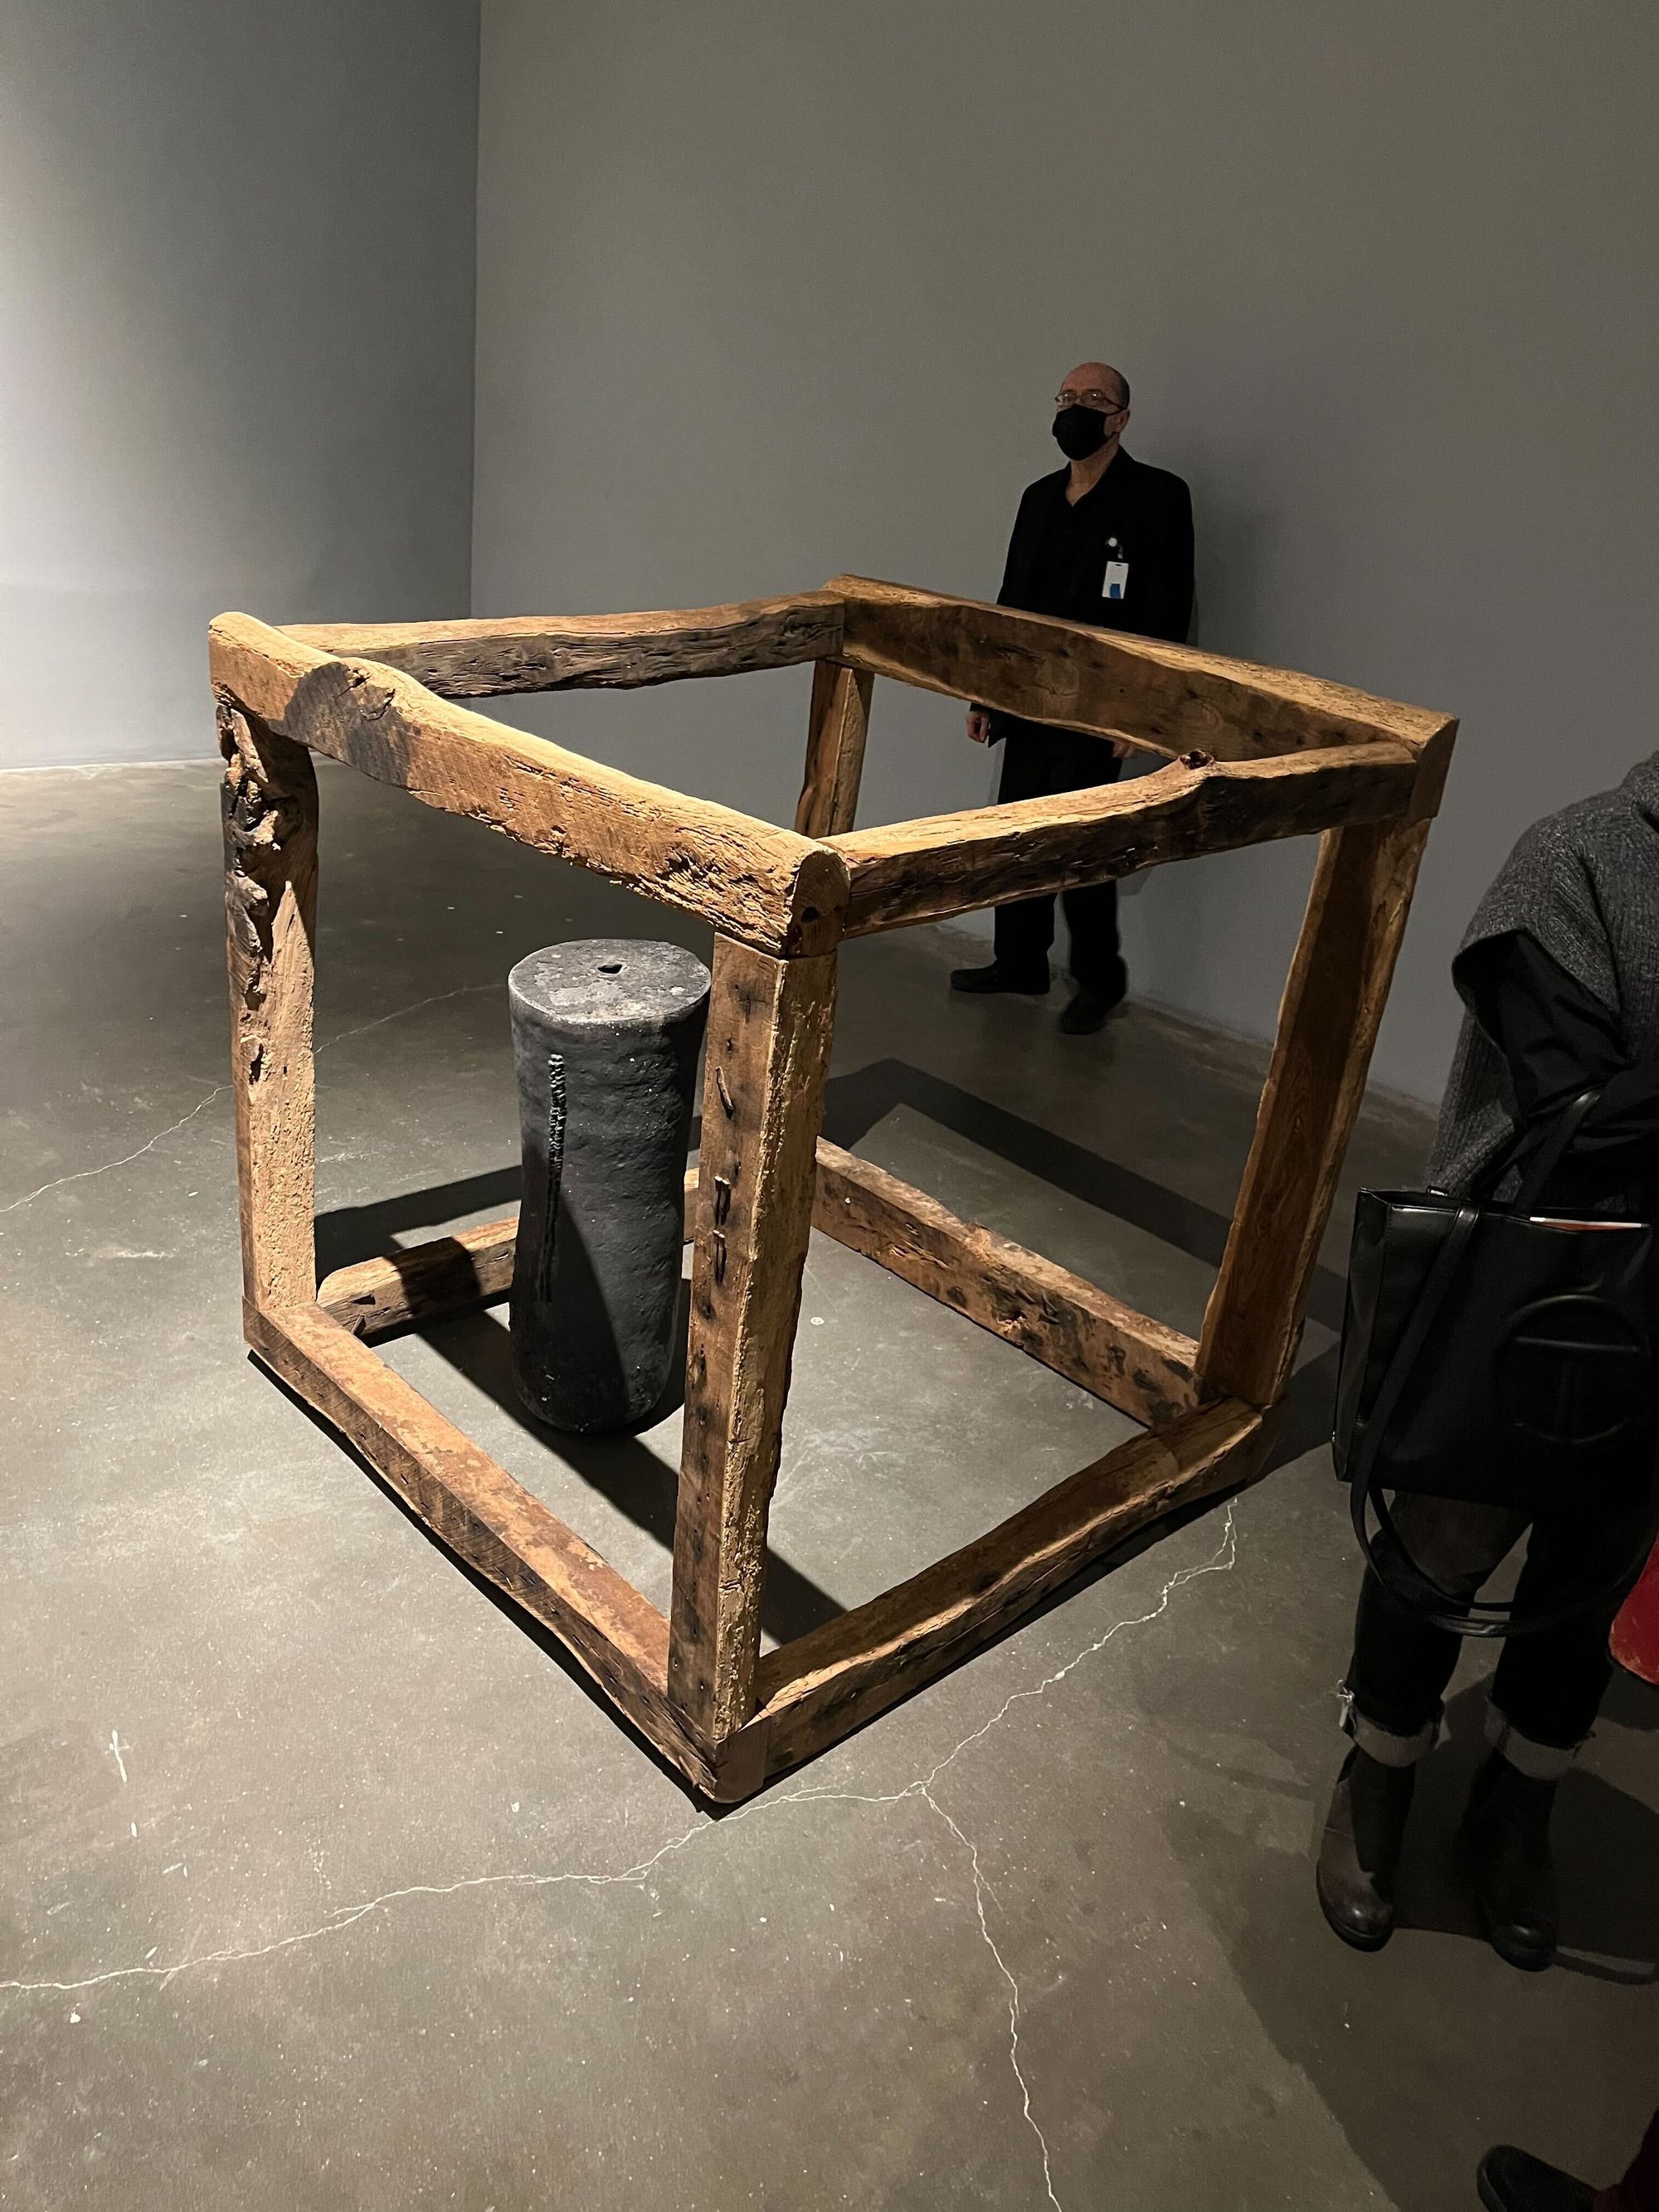 Art | Theaster Gates — "Young Lords and Their Traces"